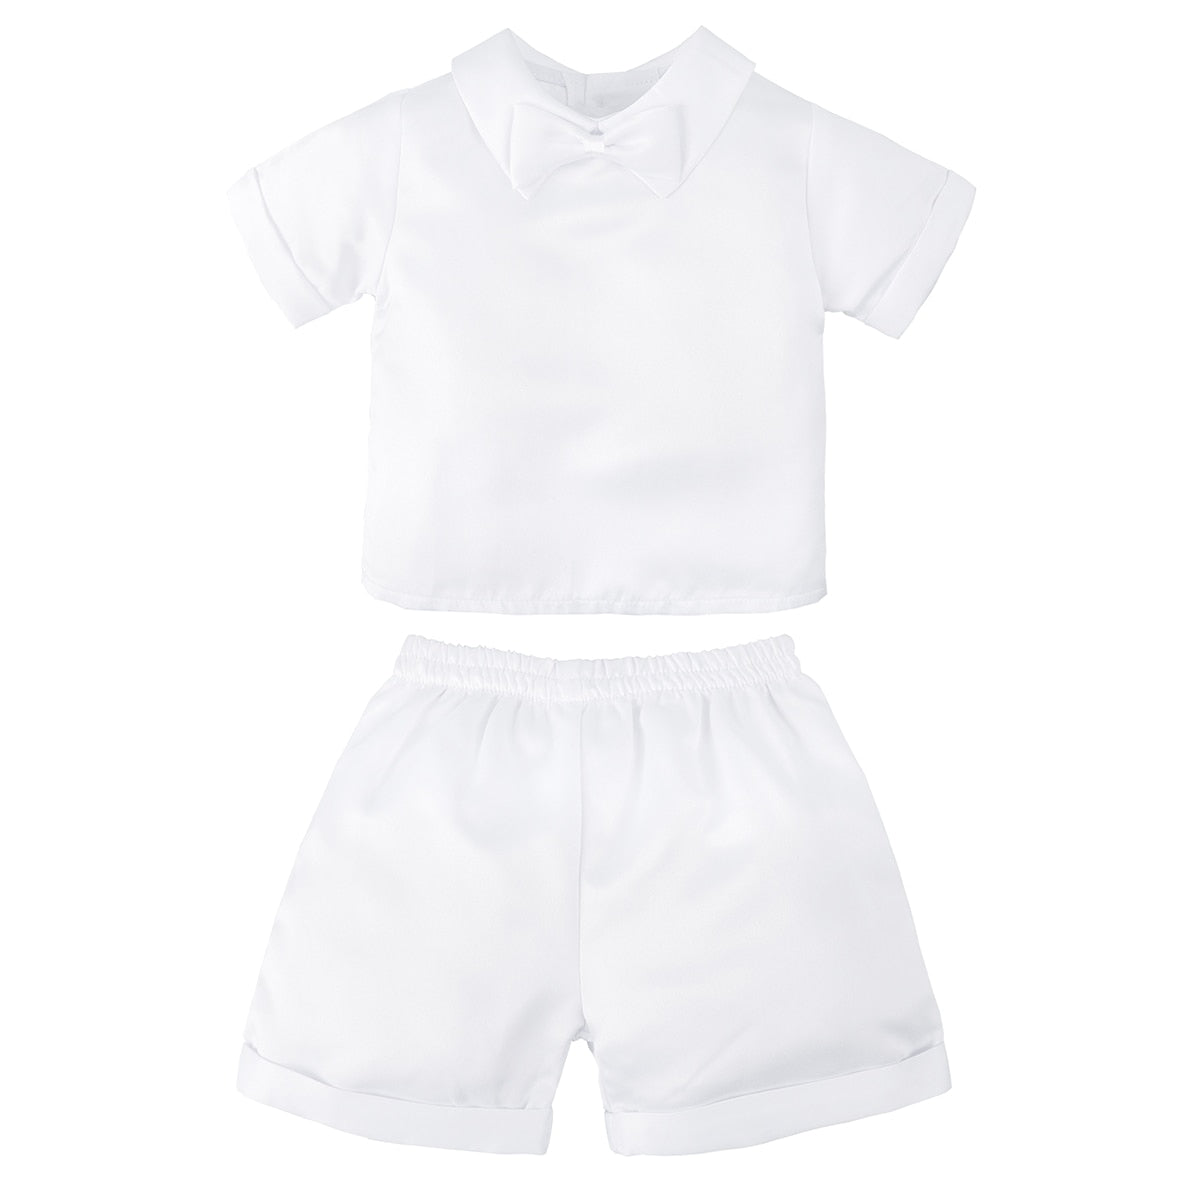 A&J DESIGN Baby Boys Baptism Suits Infant White Christening Outfits Short Sleeve Bow Tie Tops+Shorts+Vest+Hat